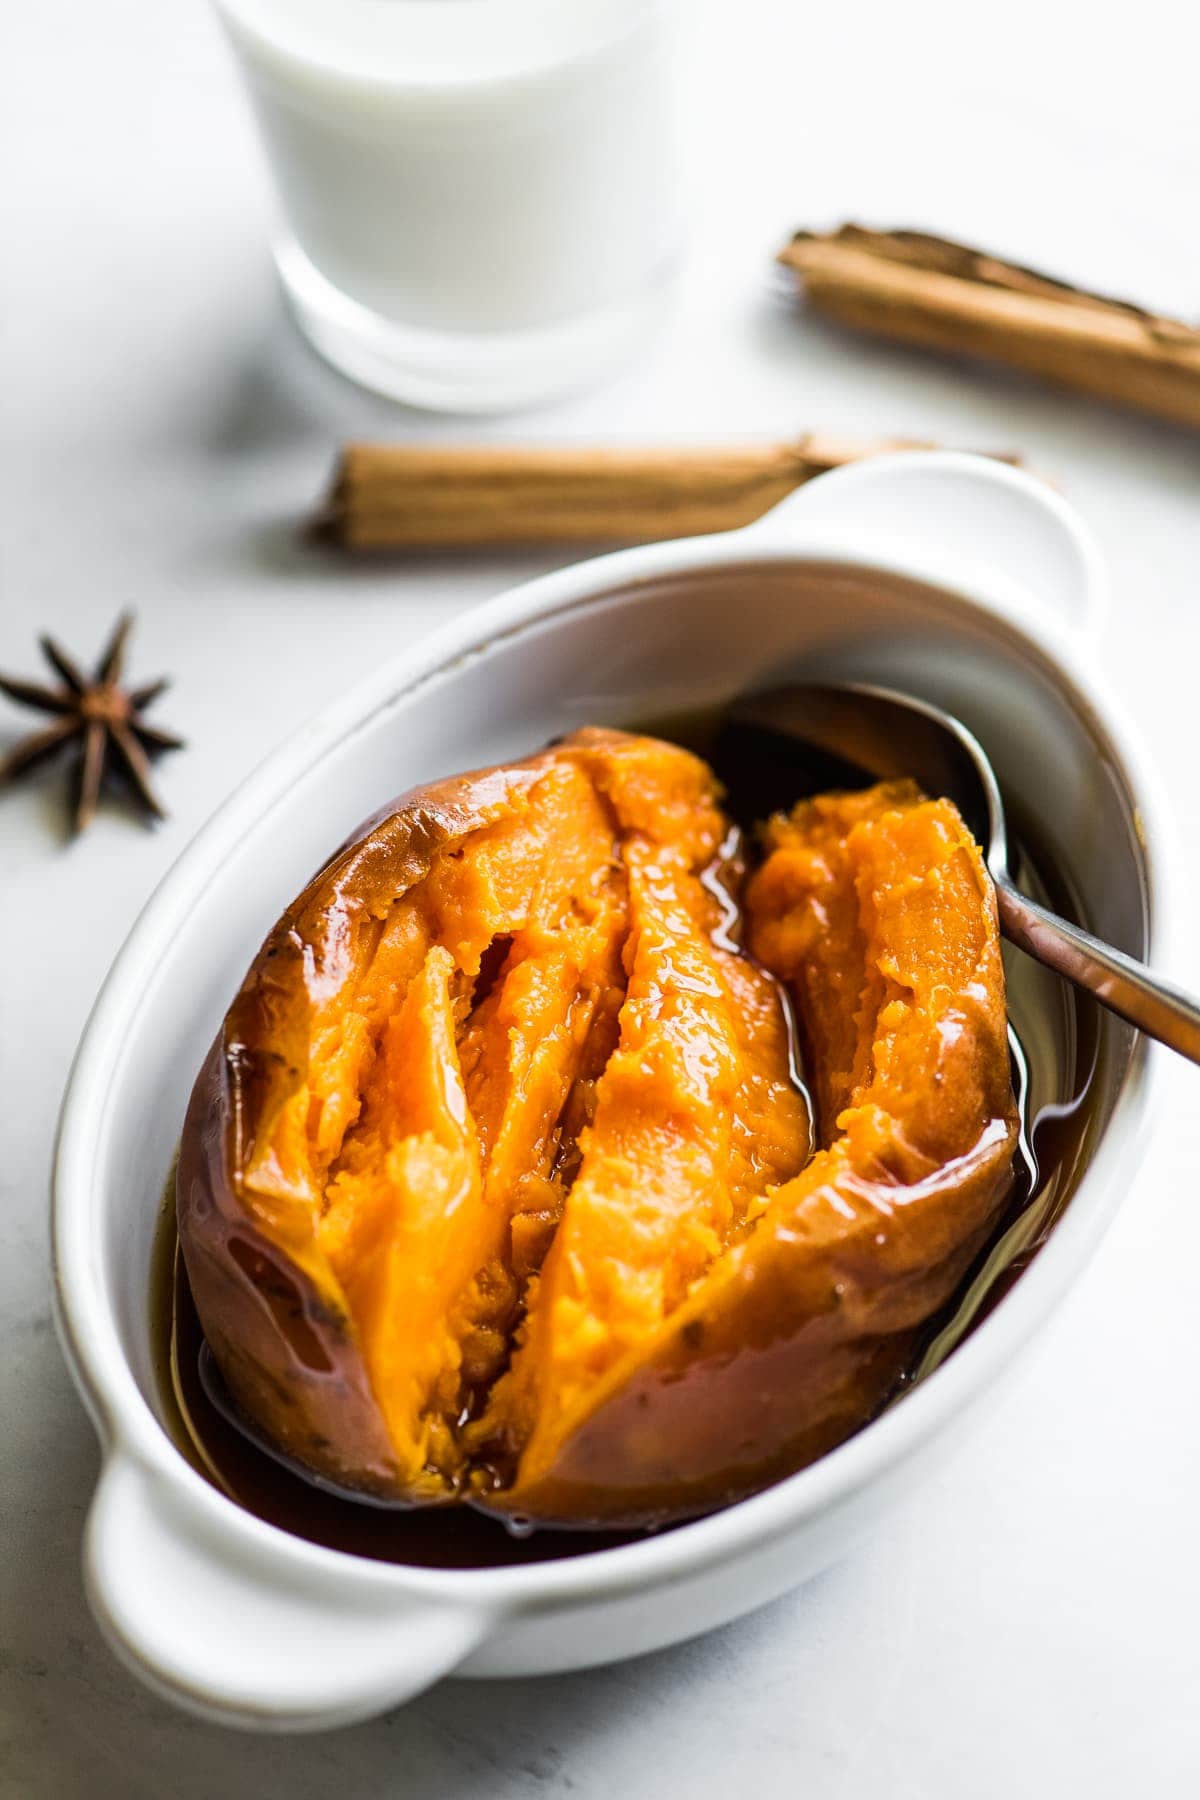 A cooked camote (or a Mexican candied sweet potato) in a bowl with piloncillo syrup.